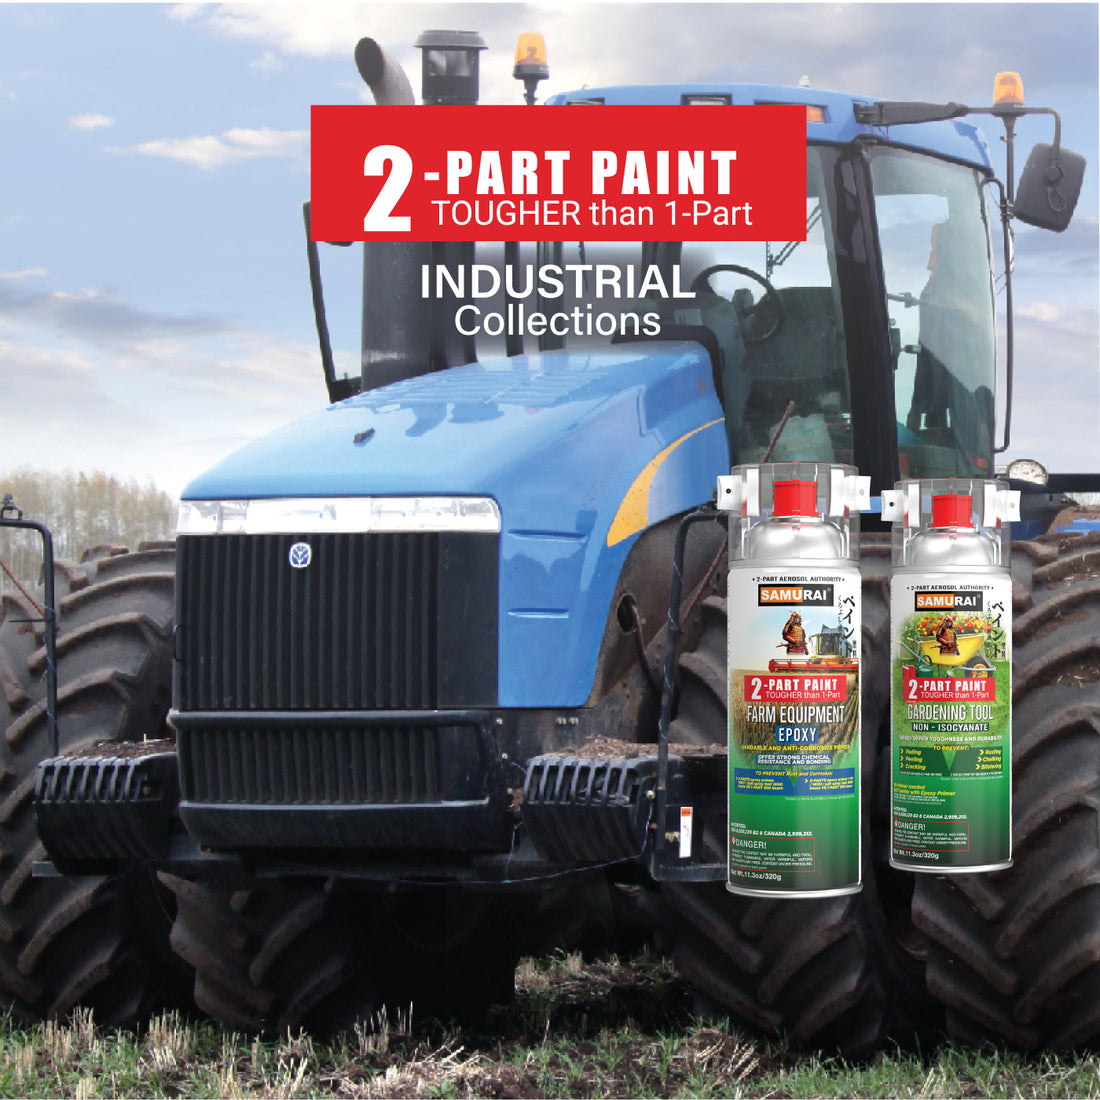 prevent fading  cracking  corrosion rust accumulation spray paint aerosol 2k marine boat 2 parts 2 components Resistant repairing  protection  truck bed coating liner